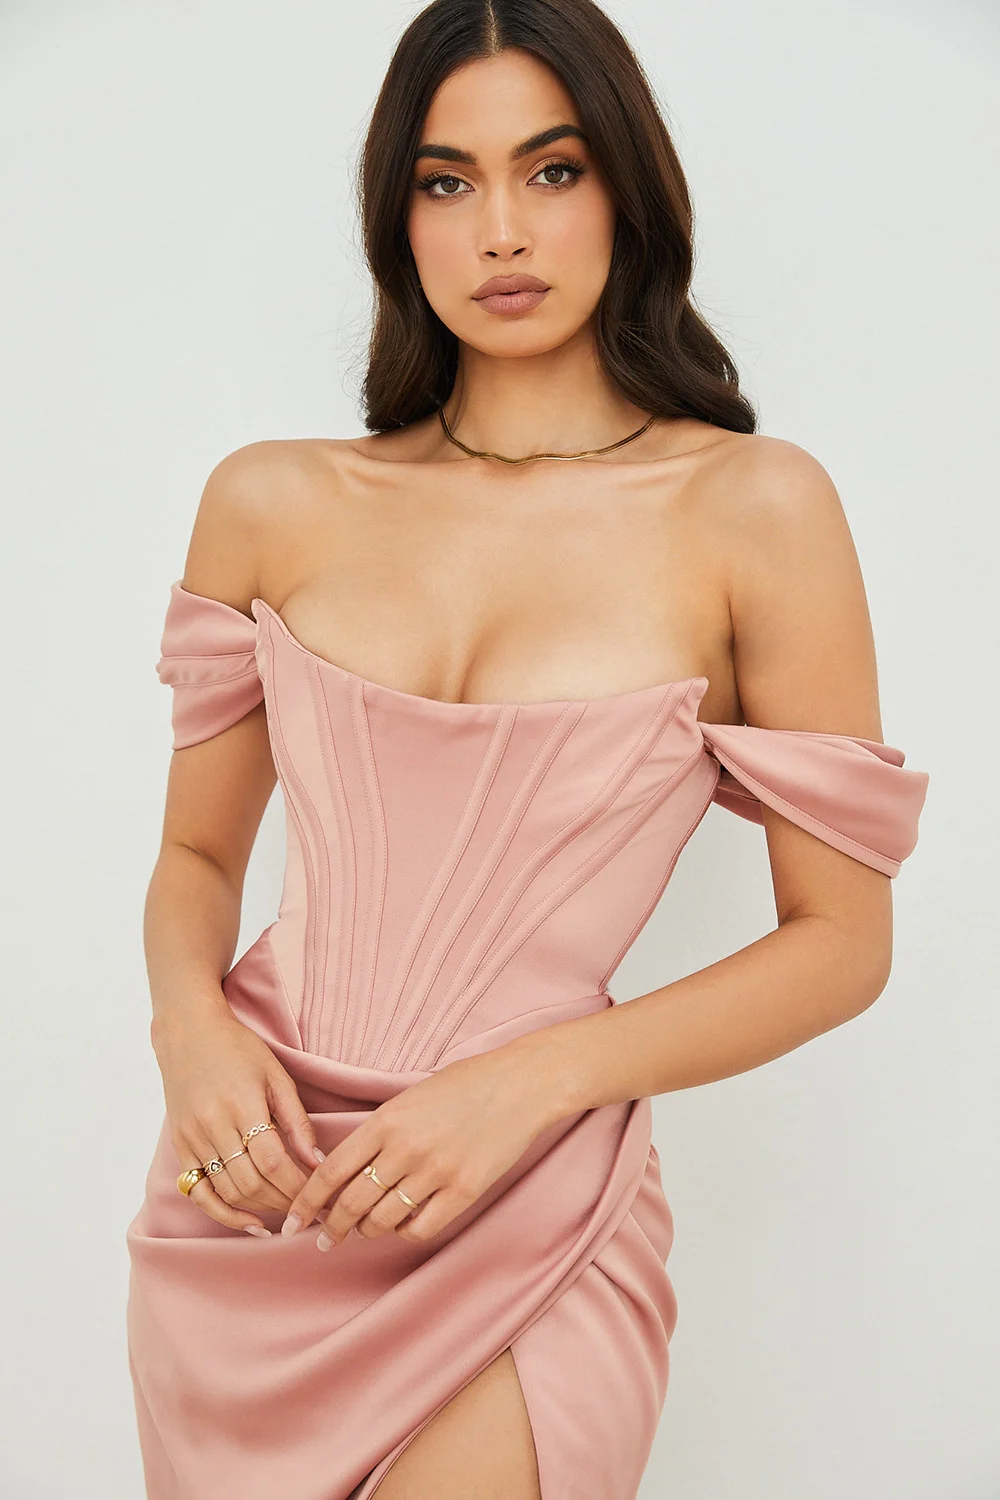 HOVON Ruched Off Shoulder Party Corset Dress Boned Split Backless Sexy Bodycon Ladies Dresses 2021 Summer Night Club Midi Dress little black dress